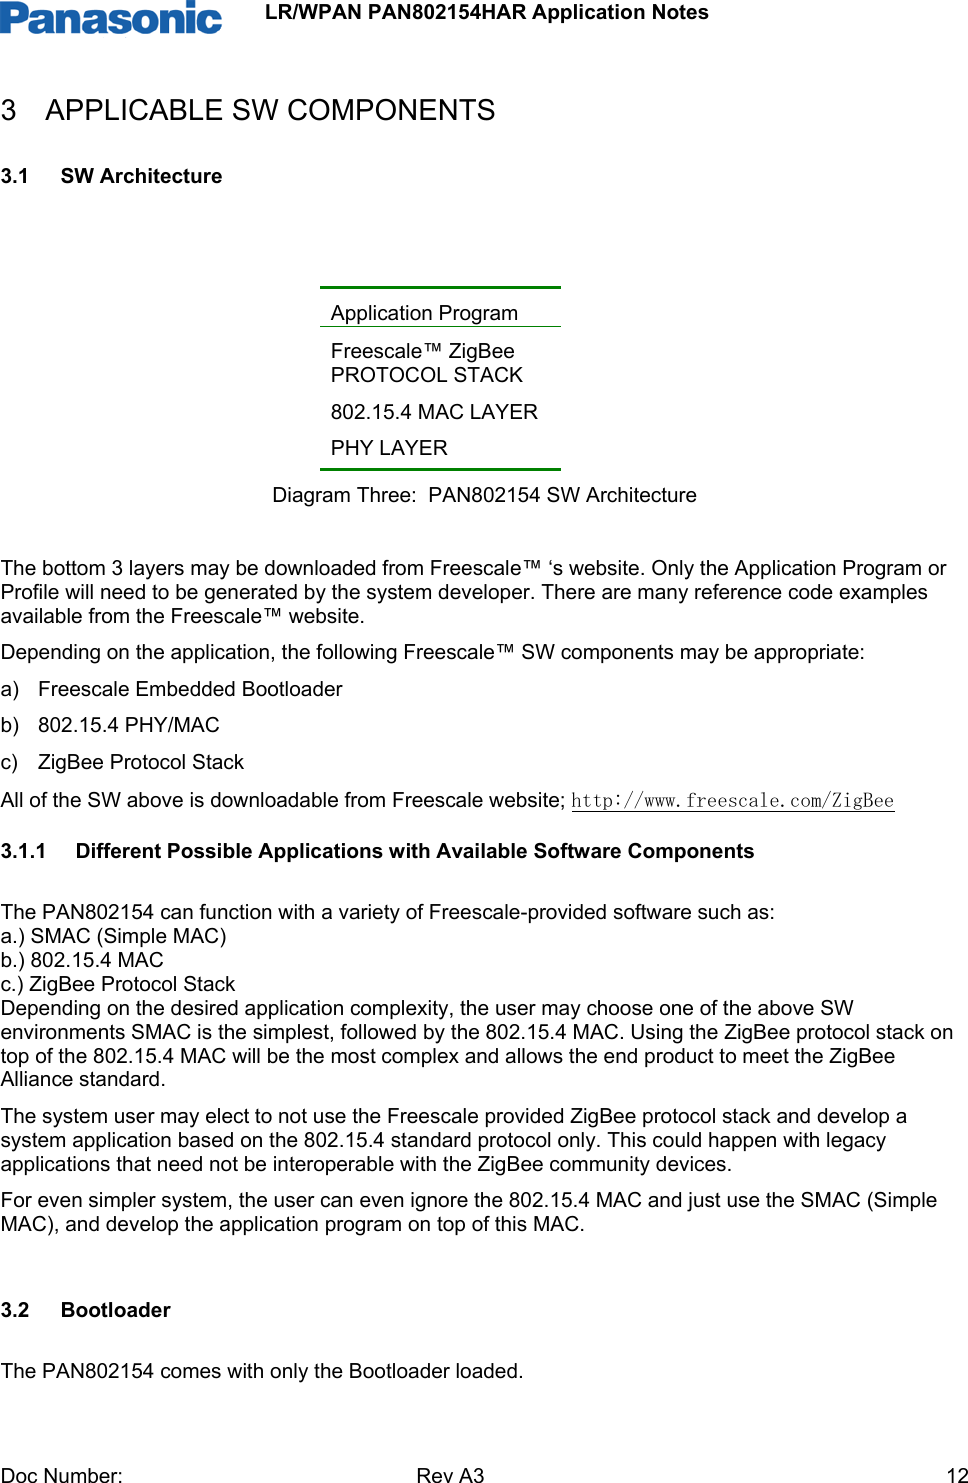                 LR/WPAN PAN802154HAR Application Notes Doc Number:   Rev A3    123 APPLICABLE SW COMPONENTS 3.1  SW Architecture    Application Program Freescale™ ZigBee PROTOCOL STACK 802.15.4 MAC LAYER PHY LAYER Diagram Three:  PAN802154 SW Architecture  The bottom 3 layers may be downloaded from Freescale™ ‘s website. Only the Application Program or Profile will need to be generated by the system developer. There are many reference code examples available from the Freescale™ website. Depending on the application, the following Freescale™ SW components may be appropriate: a)  Freescale Embedded Bootloader  b)  802.15.4 PHY/MAC  c)  ZigBee Protocol Stack  All of the SW above is downloadable from Freescale website; http://www.freescale.com/ZigBee 3.1.1  Different Possible Applications with Available Software Components The PAN802154 can function with a variety of Freescale-provided software such as:  a.) SMAC (Simple MAC) b.) 802.15.4 MAC c.) ZigBee Protocol Stack Depending on the desired application complexity, the user may choose one of the above SW environments SMAC is the simplest, followed by the 802.15.4 MAC. Using the ZigBee protocol stack on top of the 802.15.4 MAC will be the most complex and allows the end product to meet the ZigBee Alliance standard.   The system user may elect to not use the Freescale provided ZigBee protocol stack and develop a system application based on the 802.15.4 standard protocol only. This could happen with legacy applications that need not be interoperable with the ZigBee community devices. For even simpler system, the user can even ignore the 802.15.4 MAC and just use the SMAC (Simple MAC), and develop the application program on top of this MAC.  3.2 Bootloader The PAN802154 comes with only the Bootloader loaded.  